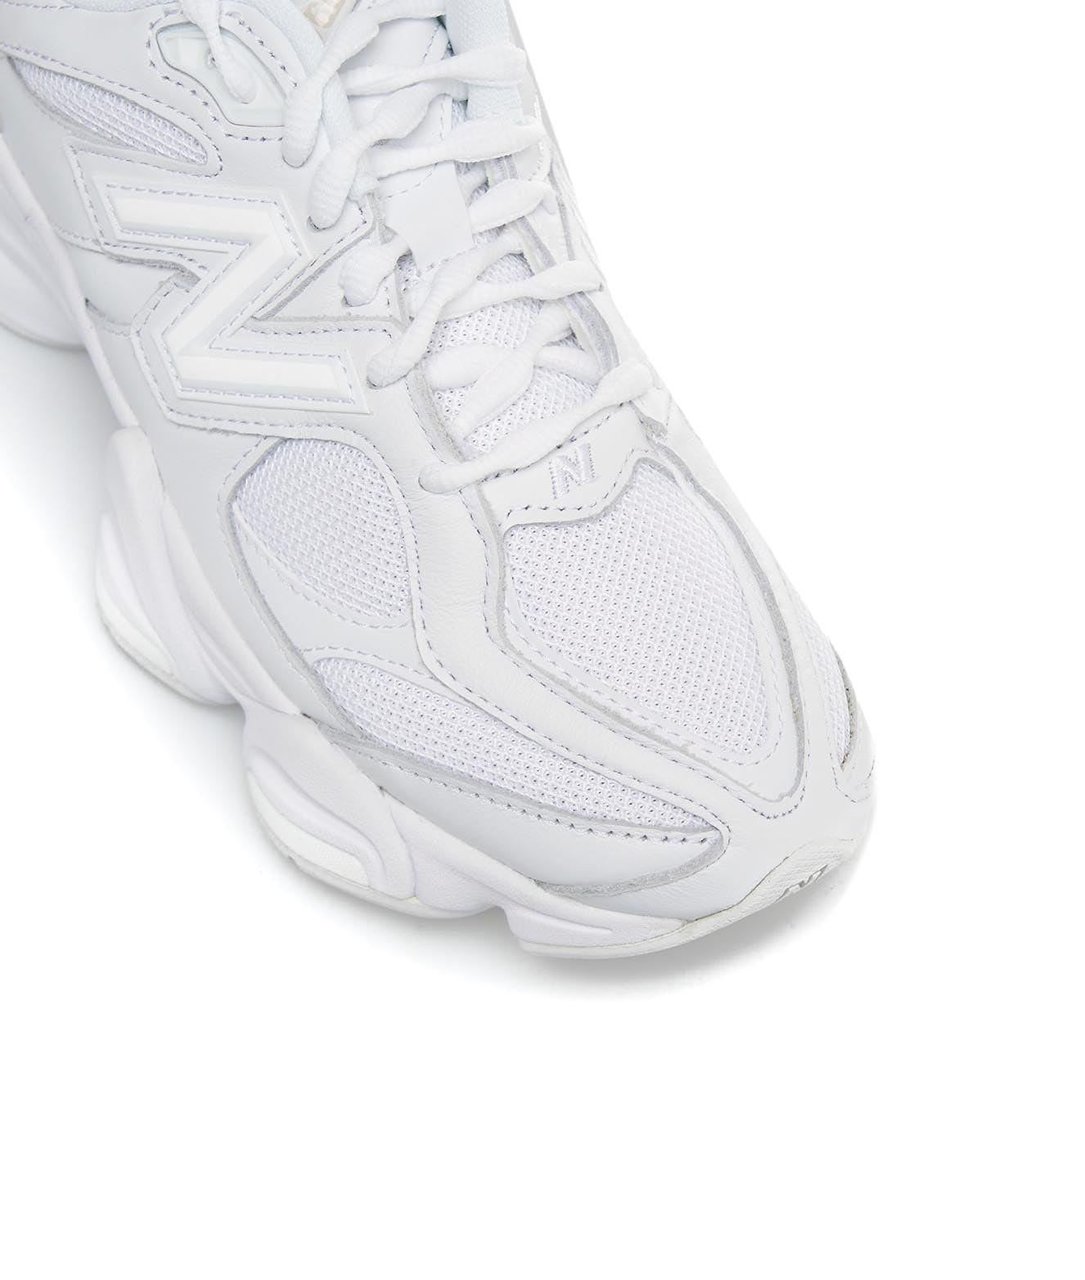 New Balance Sneakers "9060" Wit